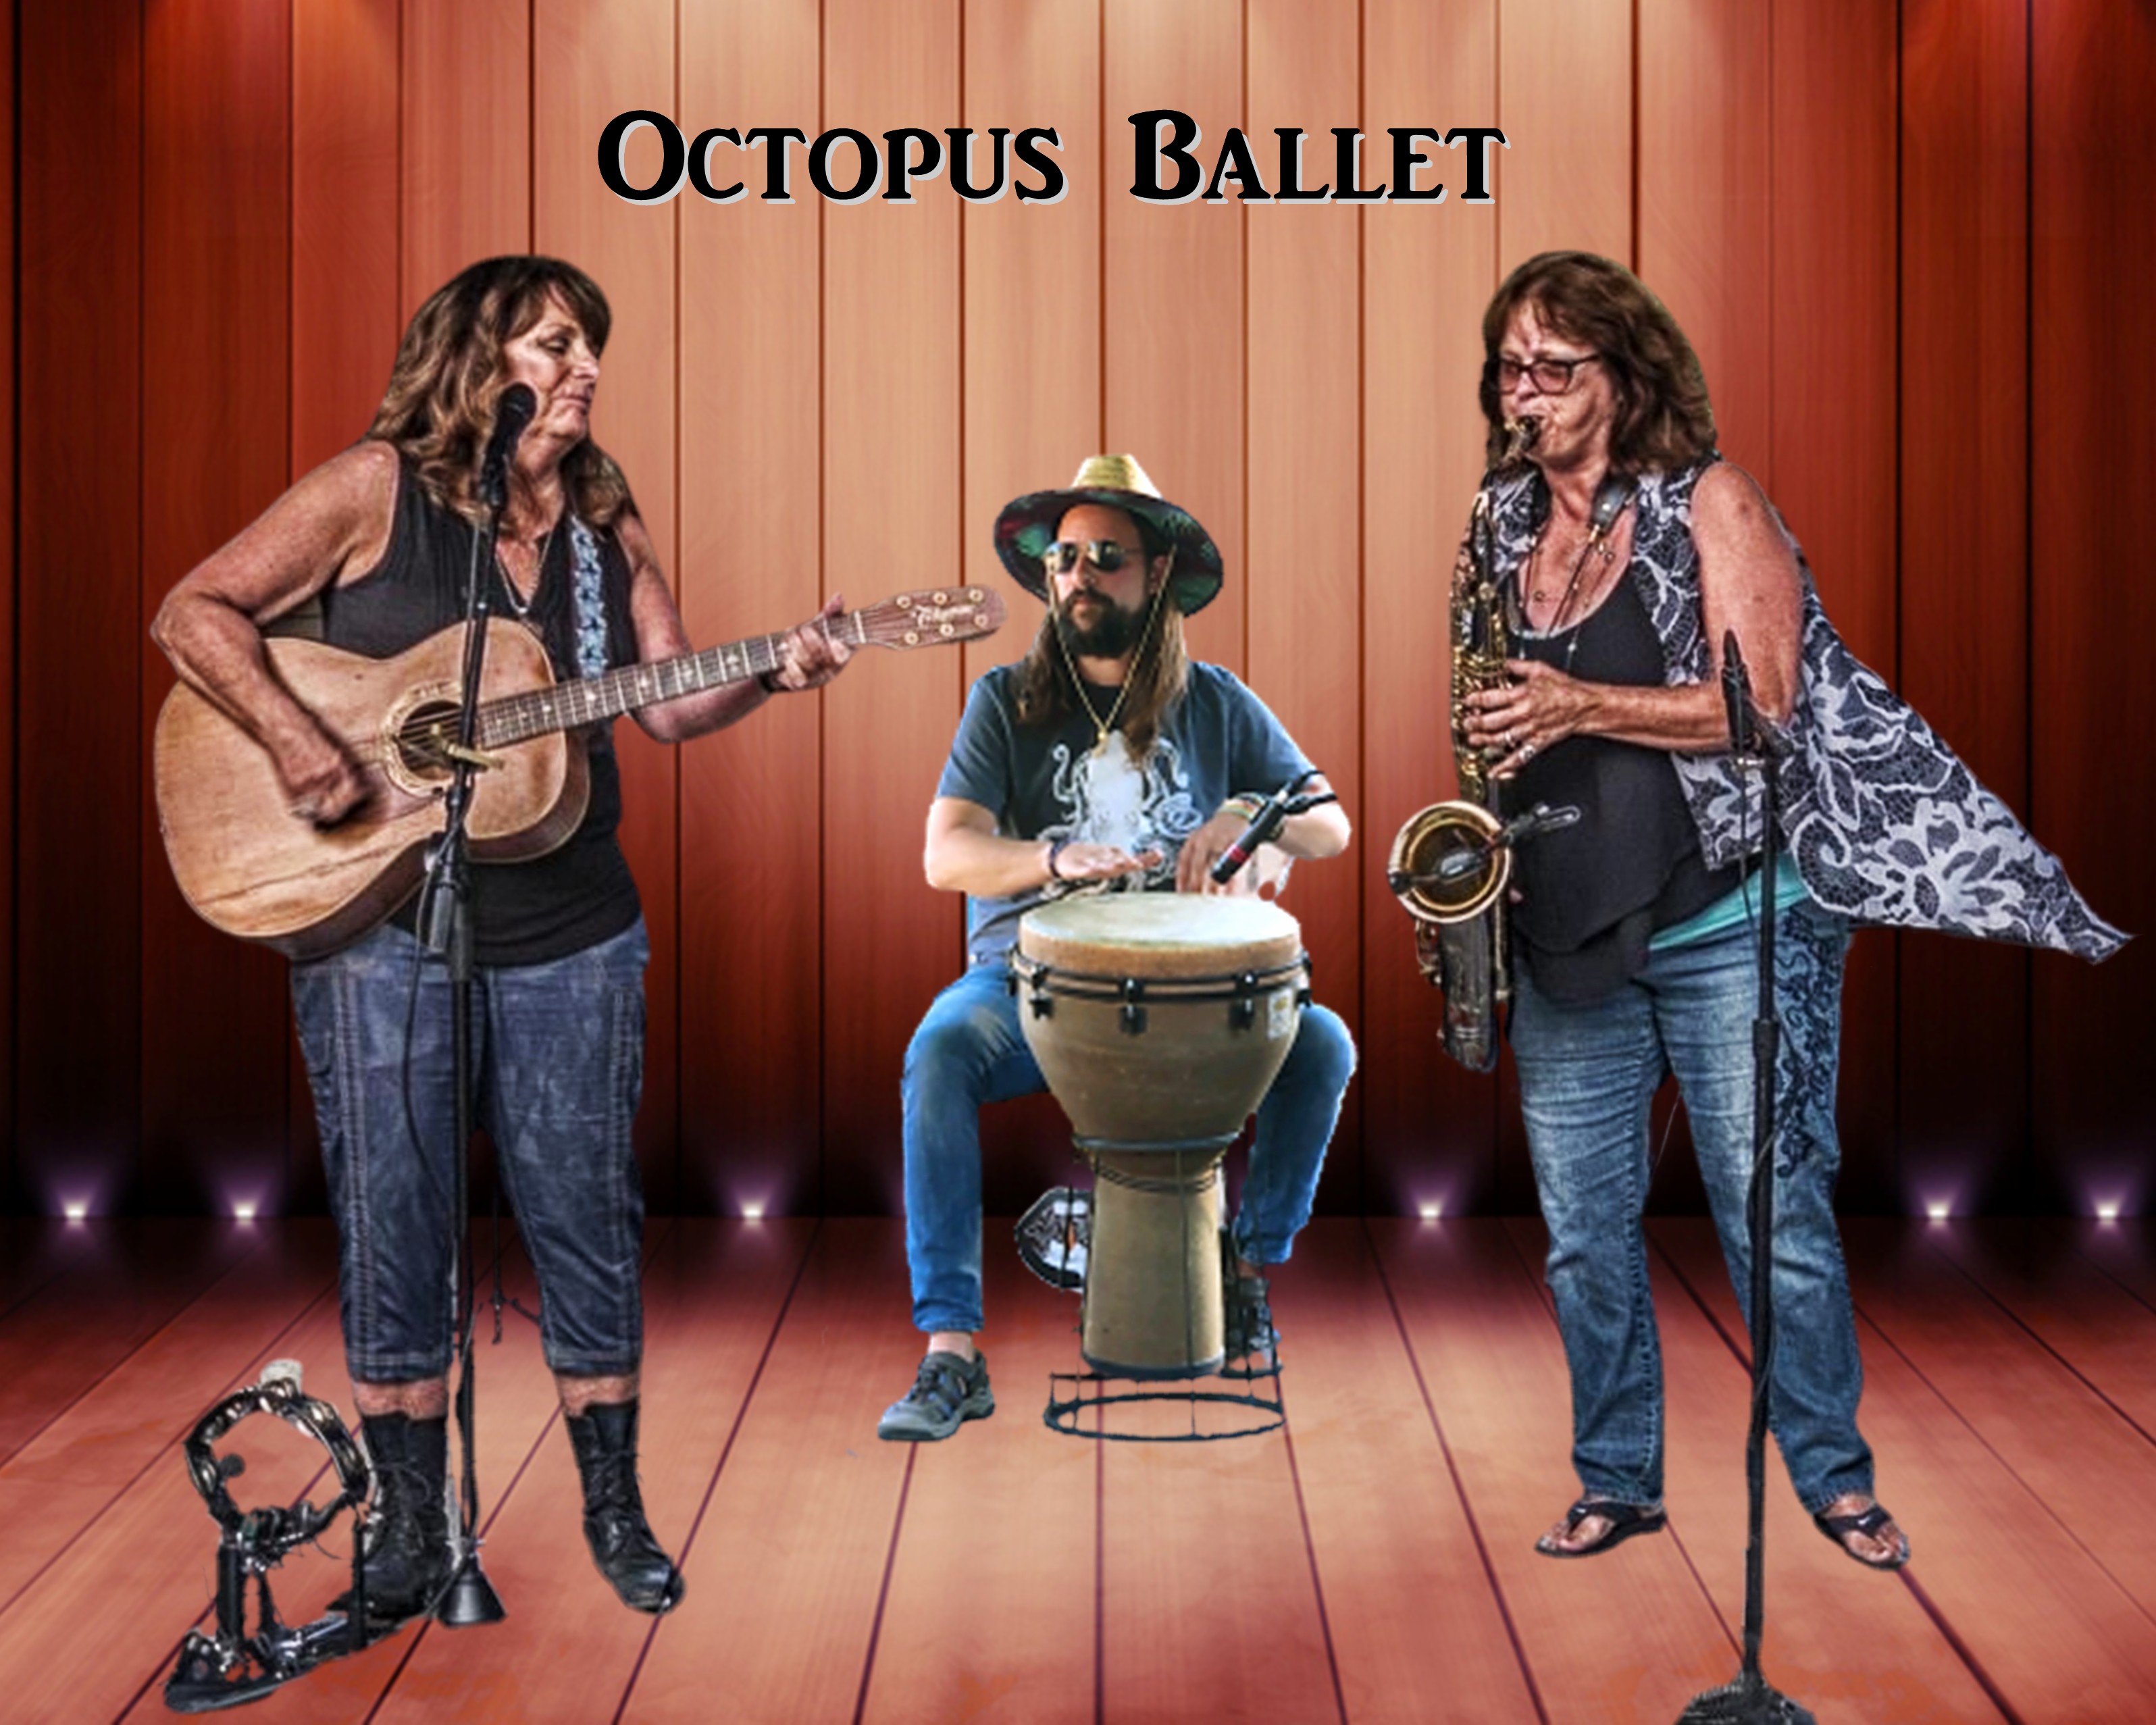 Product Image for 11-03-23 Octopus Ballet in the Loft on Friday, October 3rd from 6:30-8:30pm